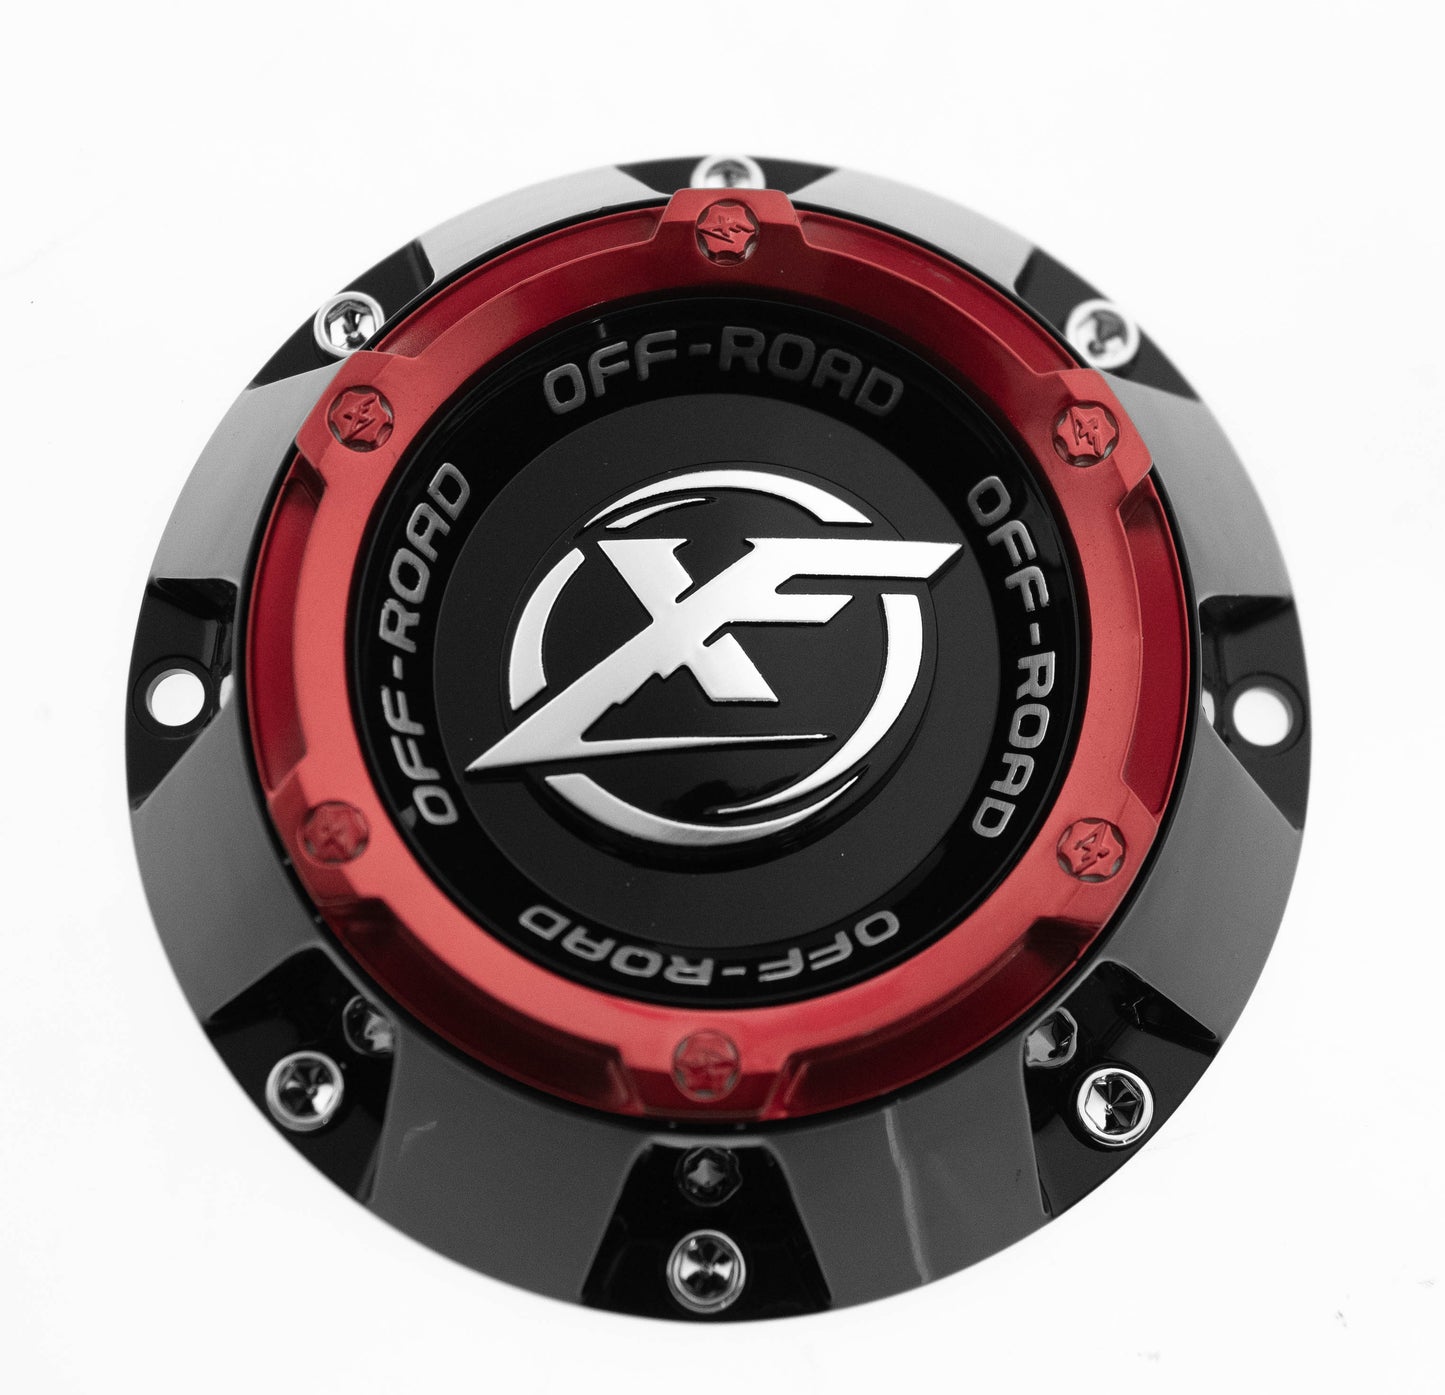 XF CAP Small GB + Anodized Red ring